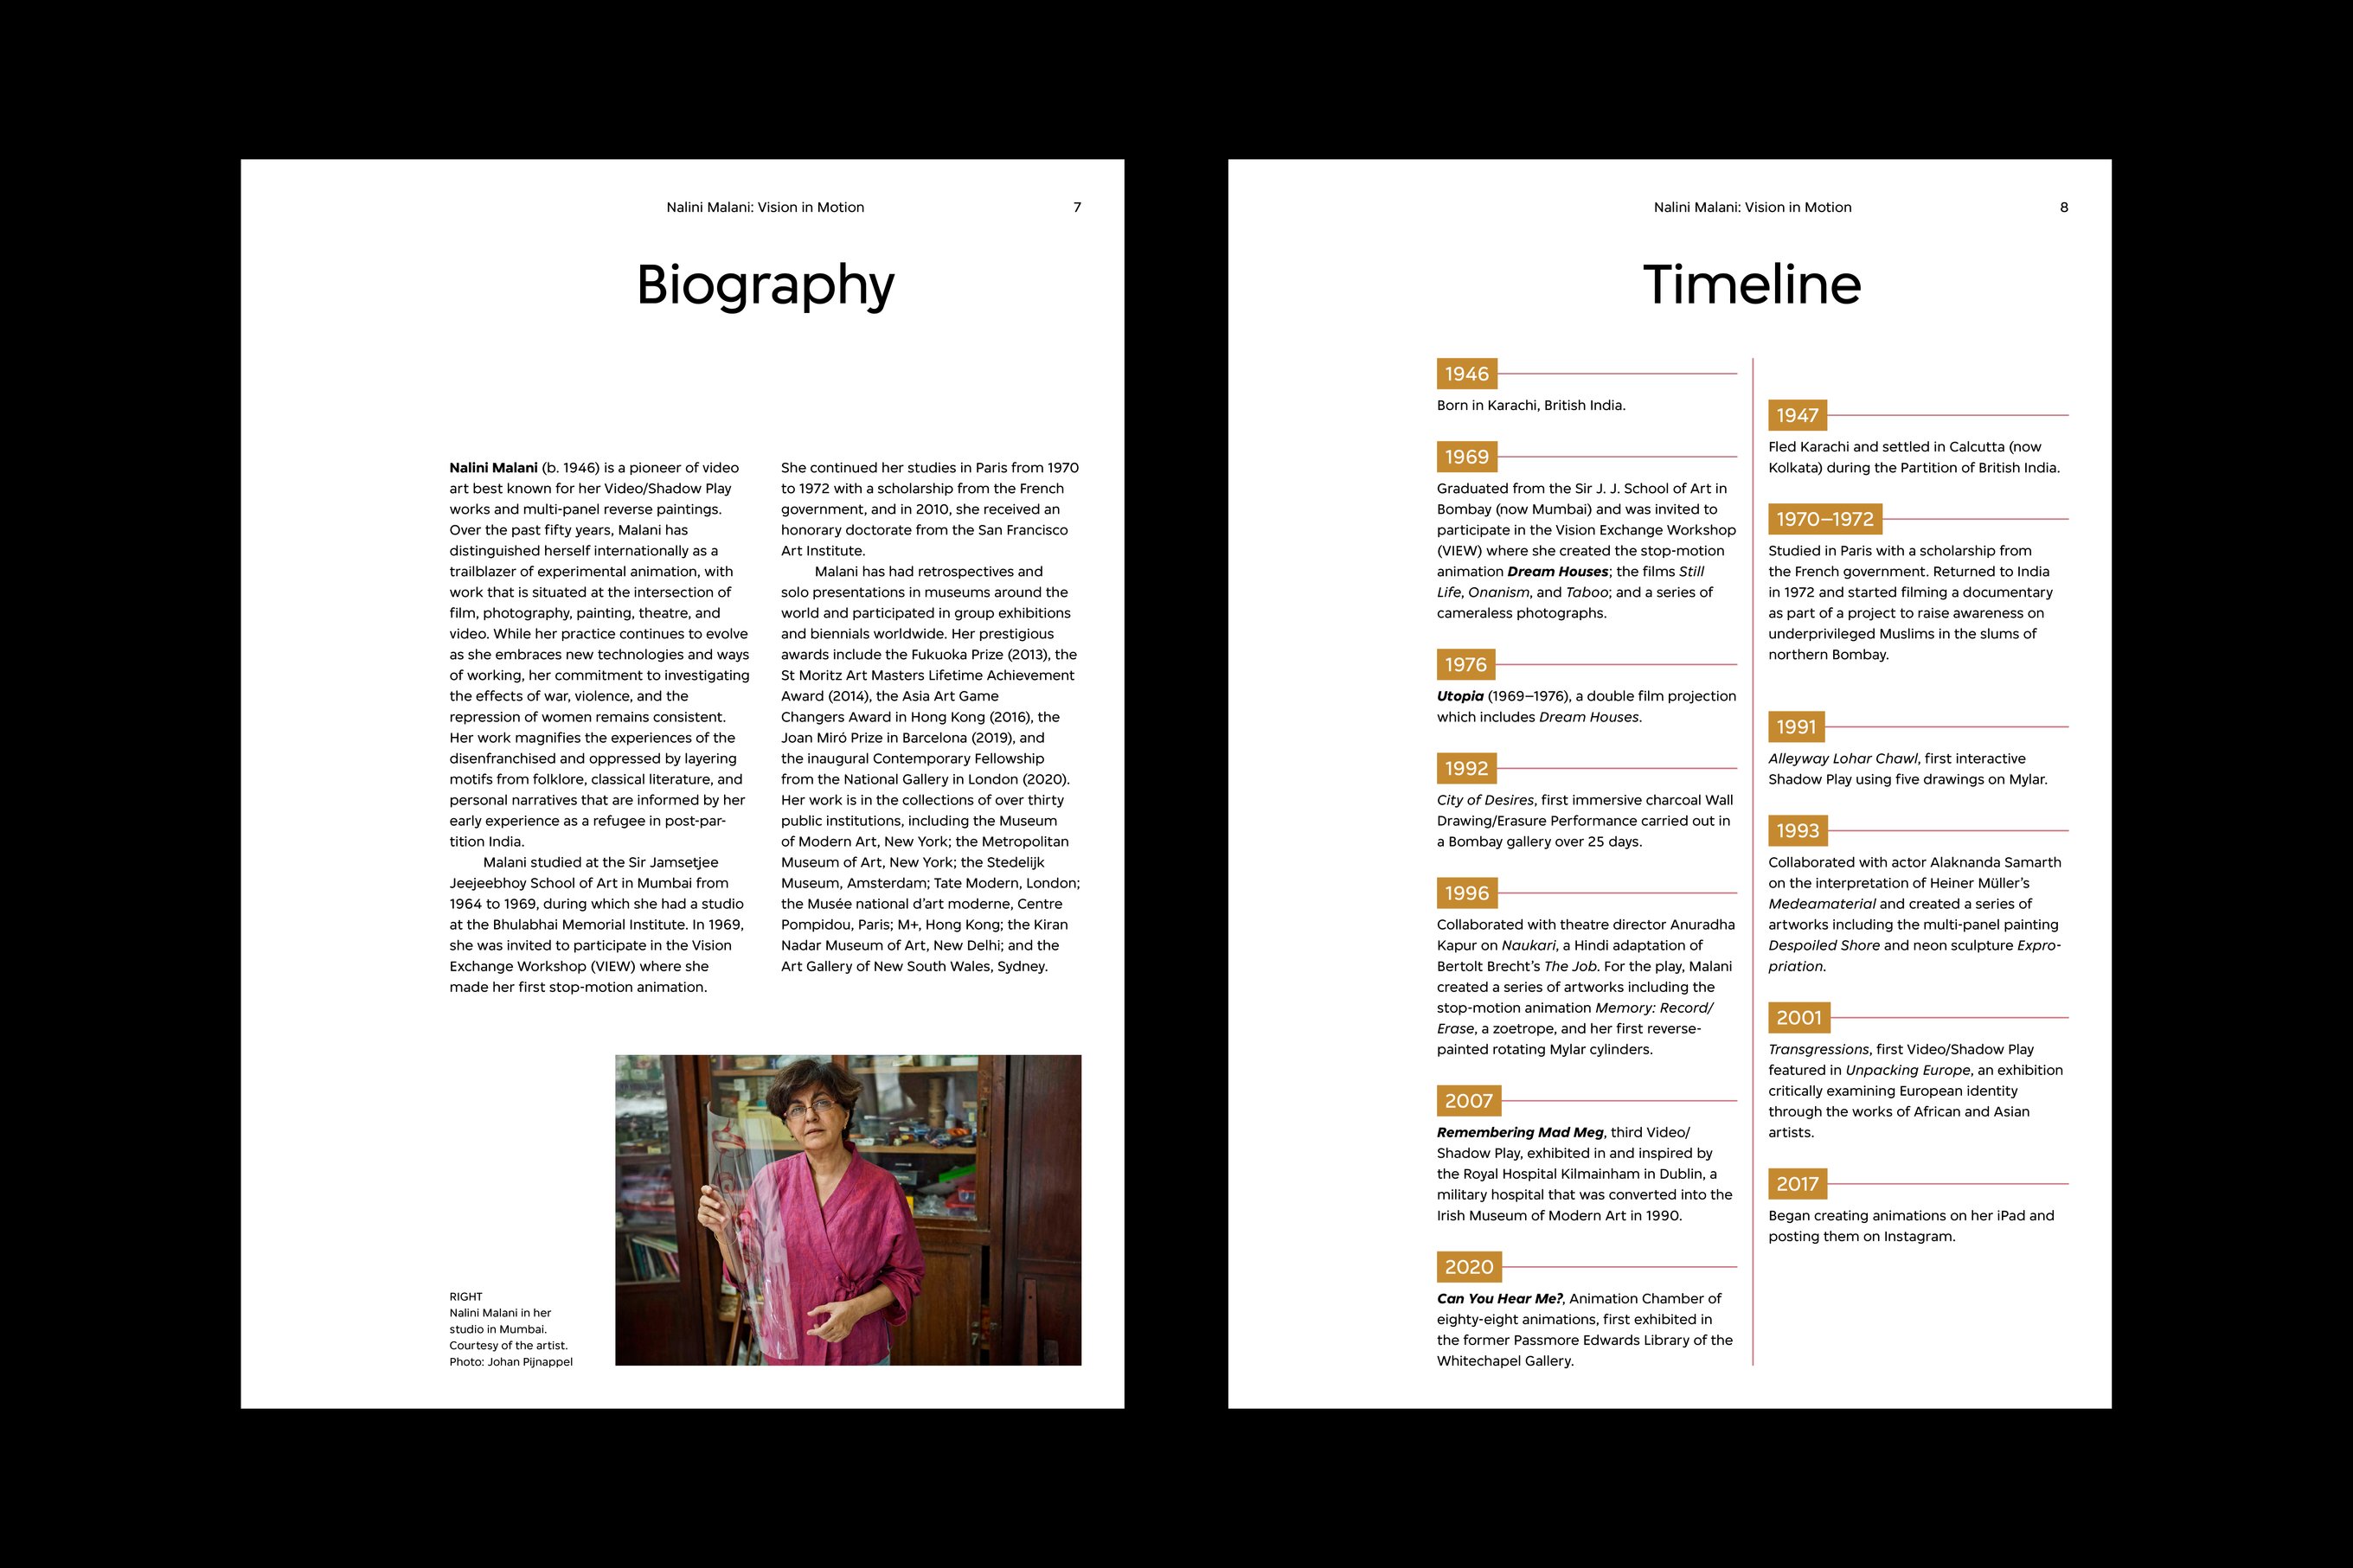 Biography and timeline page designs for the Nalini Malani exhibition brochure.